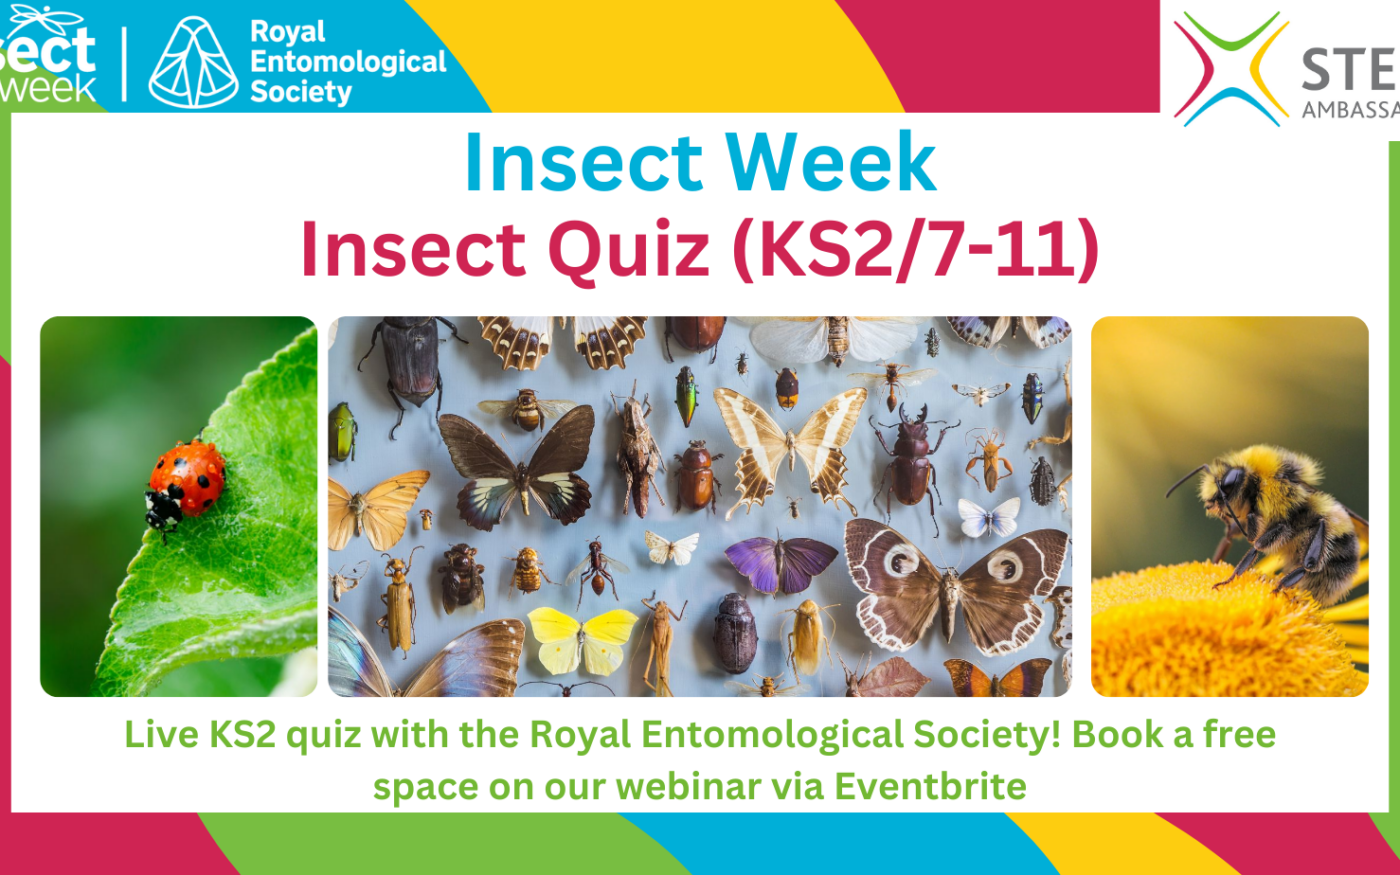 Insect Quiz for Insect Week